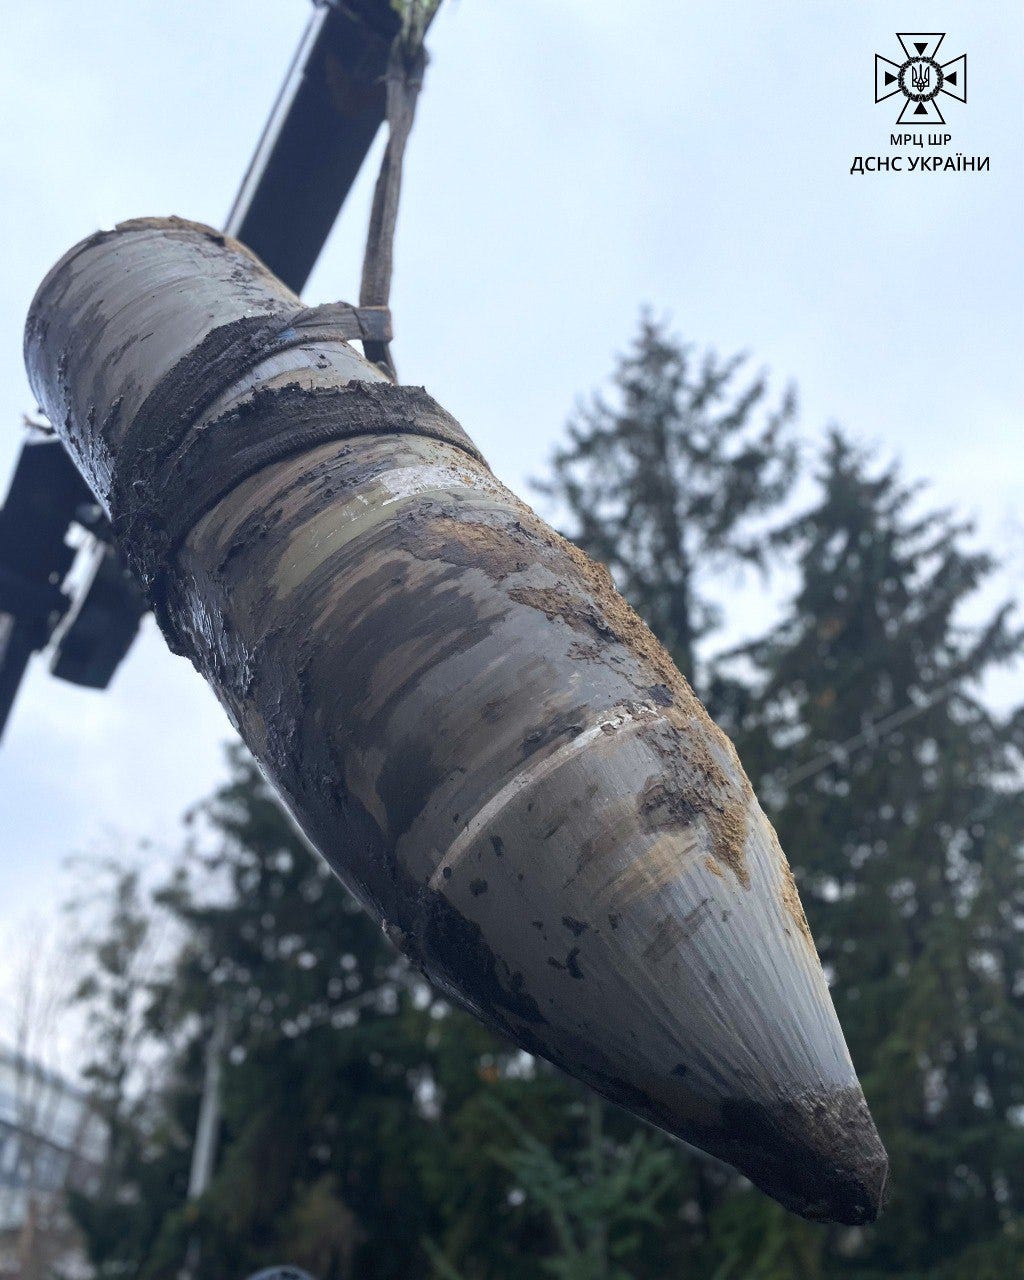 photos show sappers neutralizing the warhead of one of russia's overhyped kinzhal missiles after it was shot down